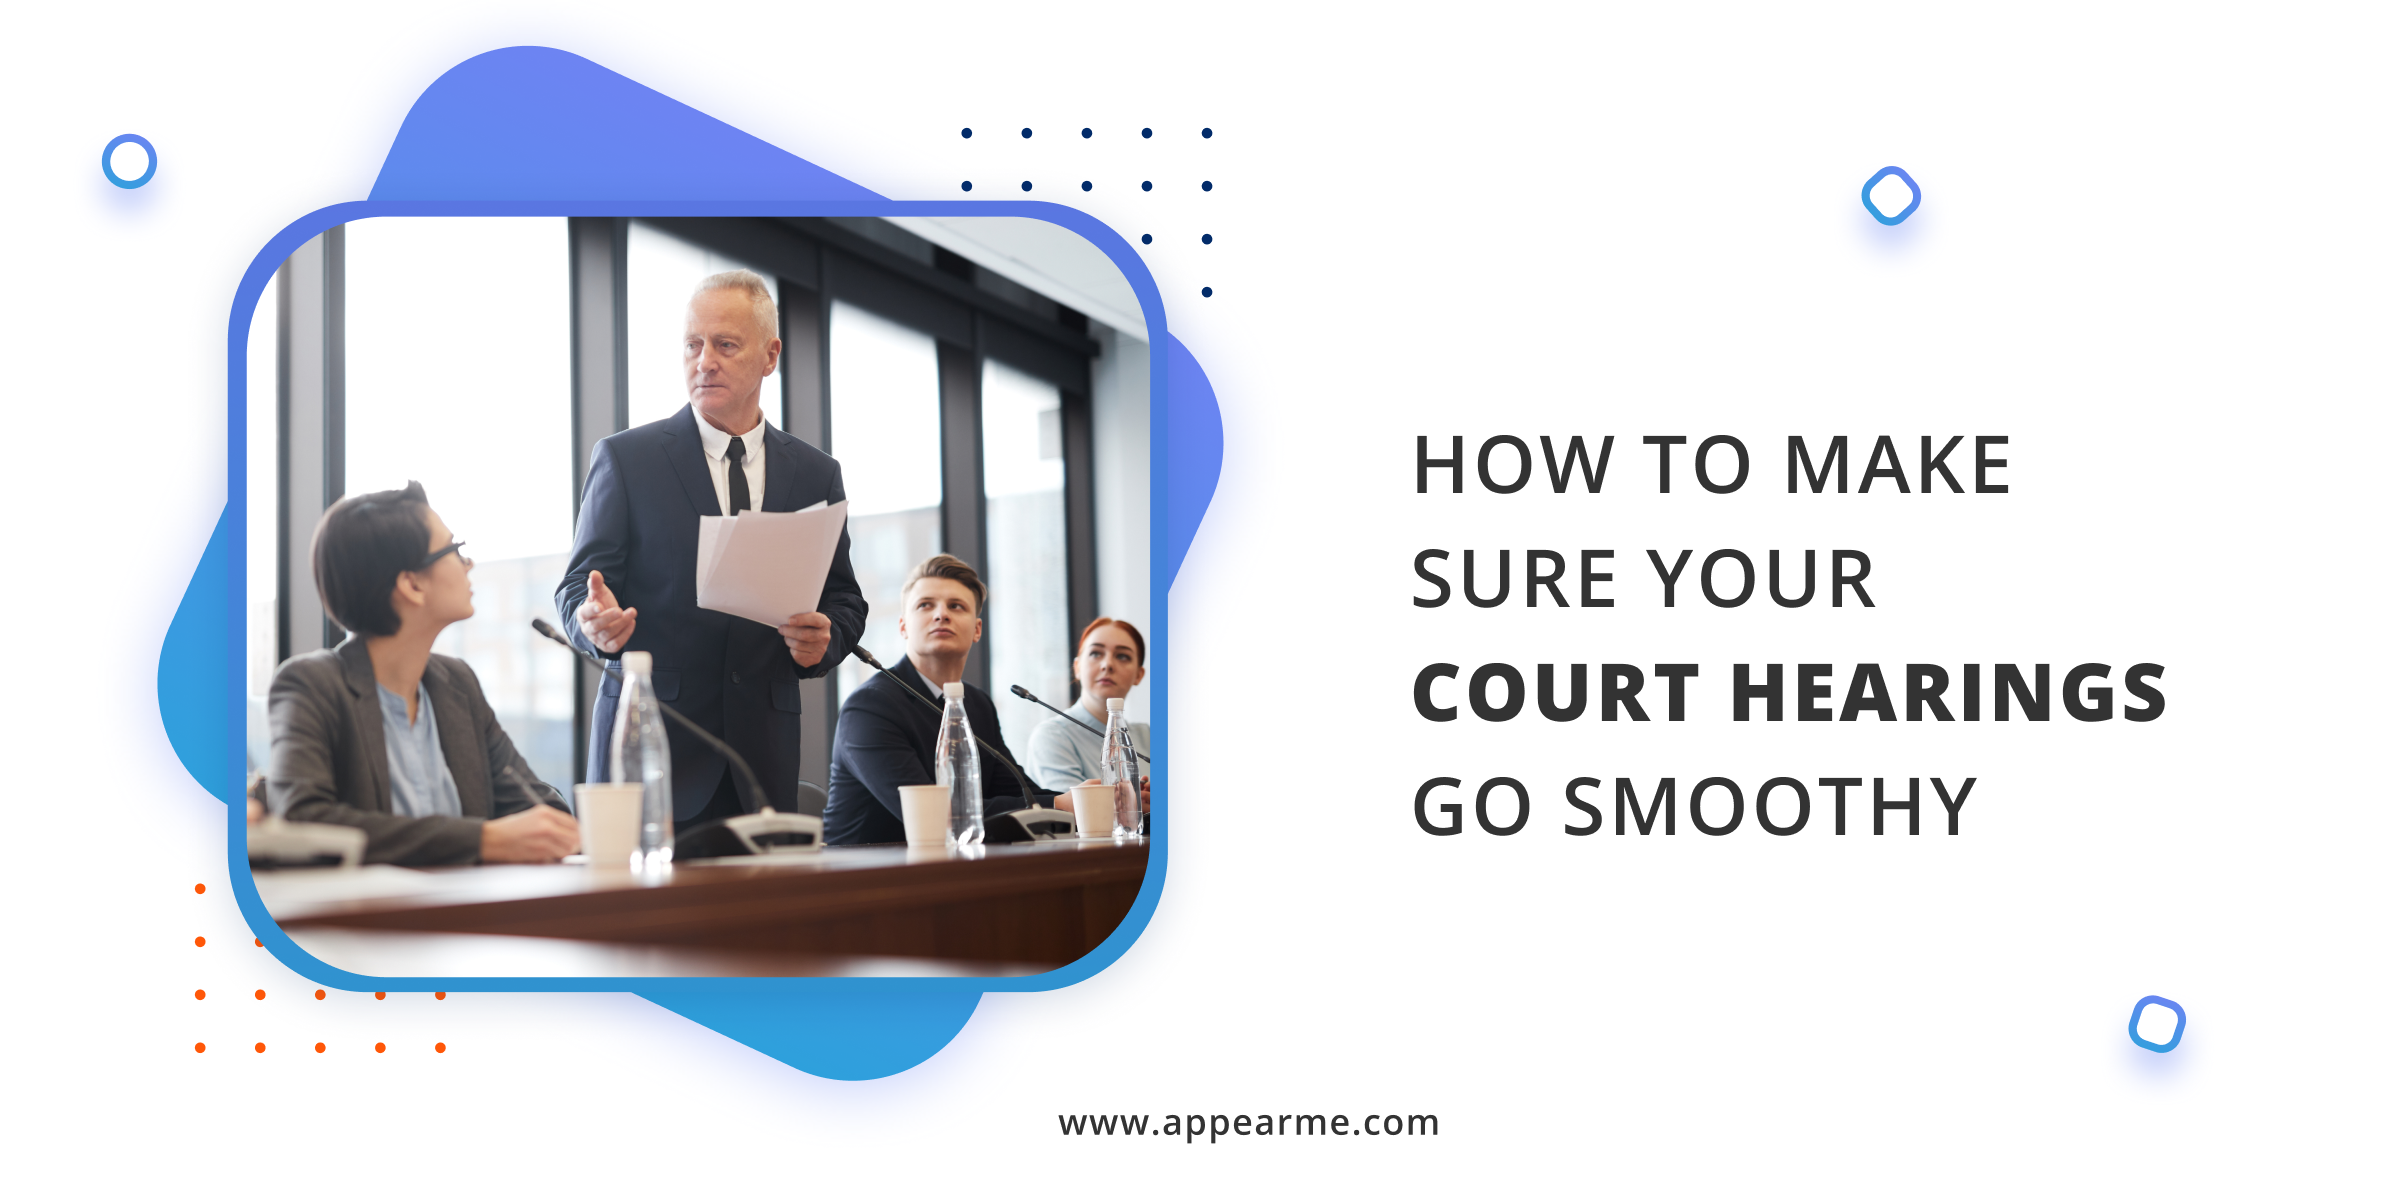 How to Make Sure Your Court Hearings Go Smoothy?